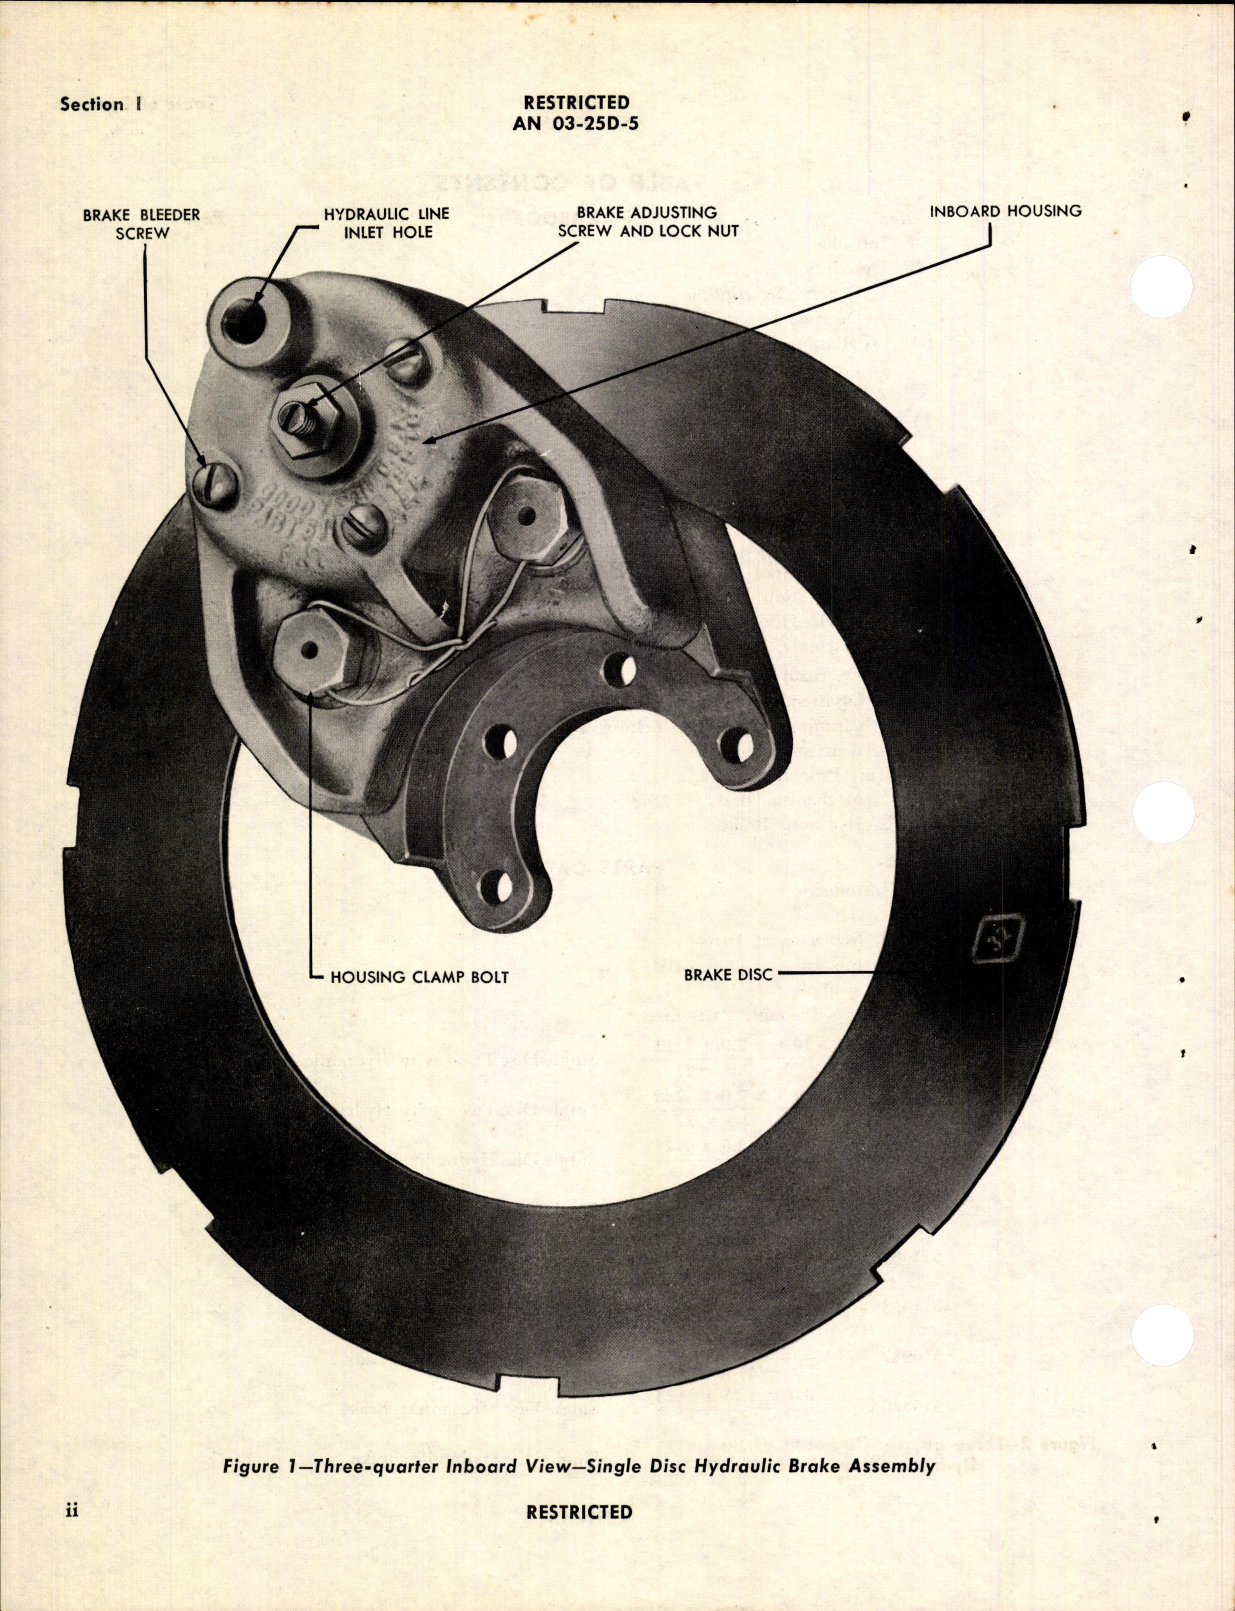 Sample page 4 from AirCorps Library document: Instructions with Parts Catalog for Single Disk Brakes